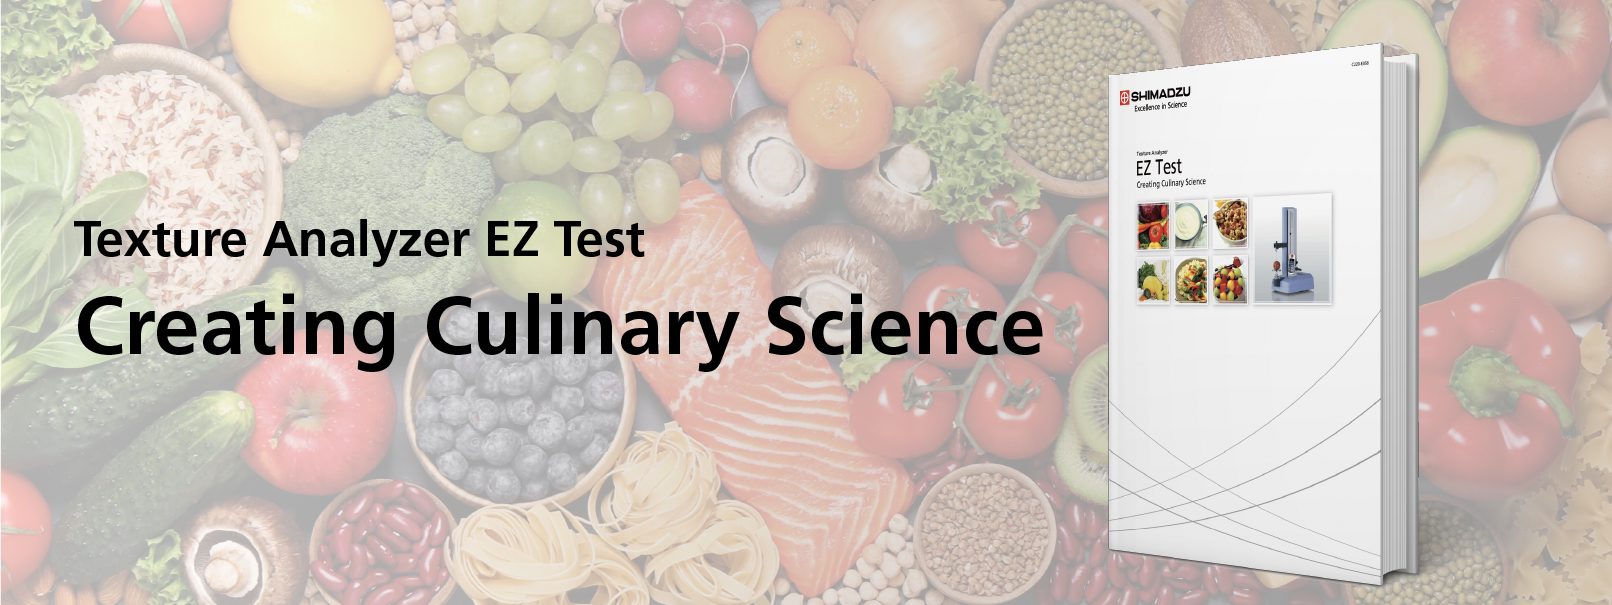 Texture Analyser EZ Test, Creating Culinary Science